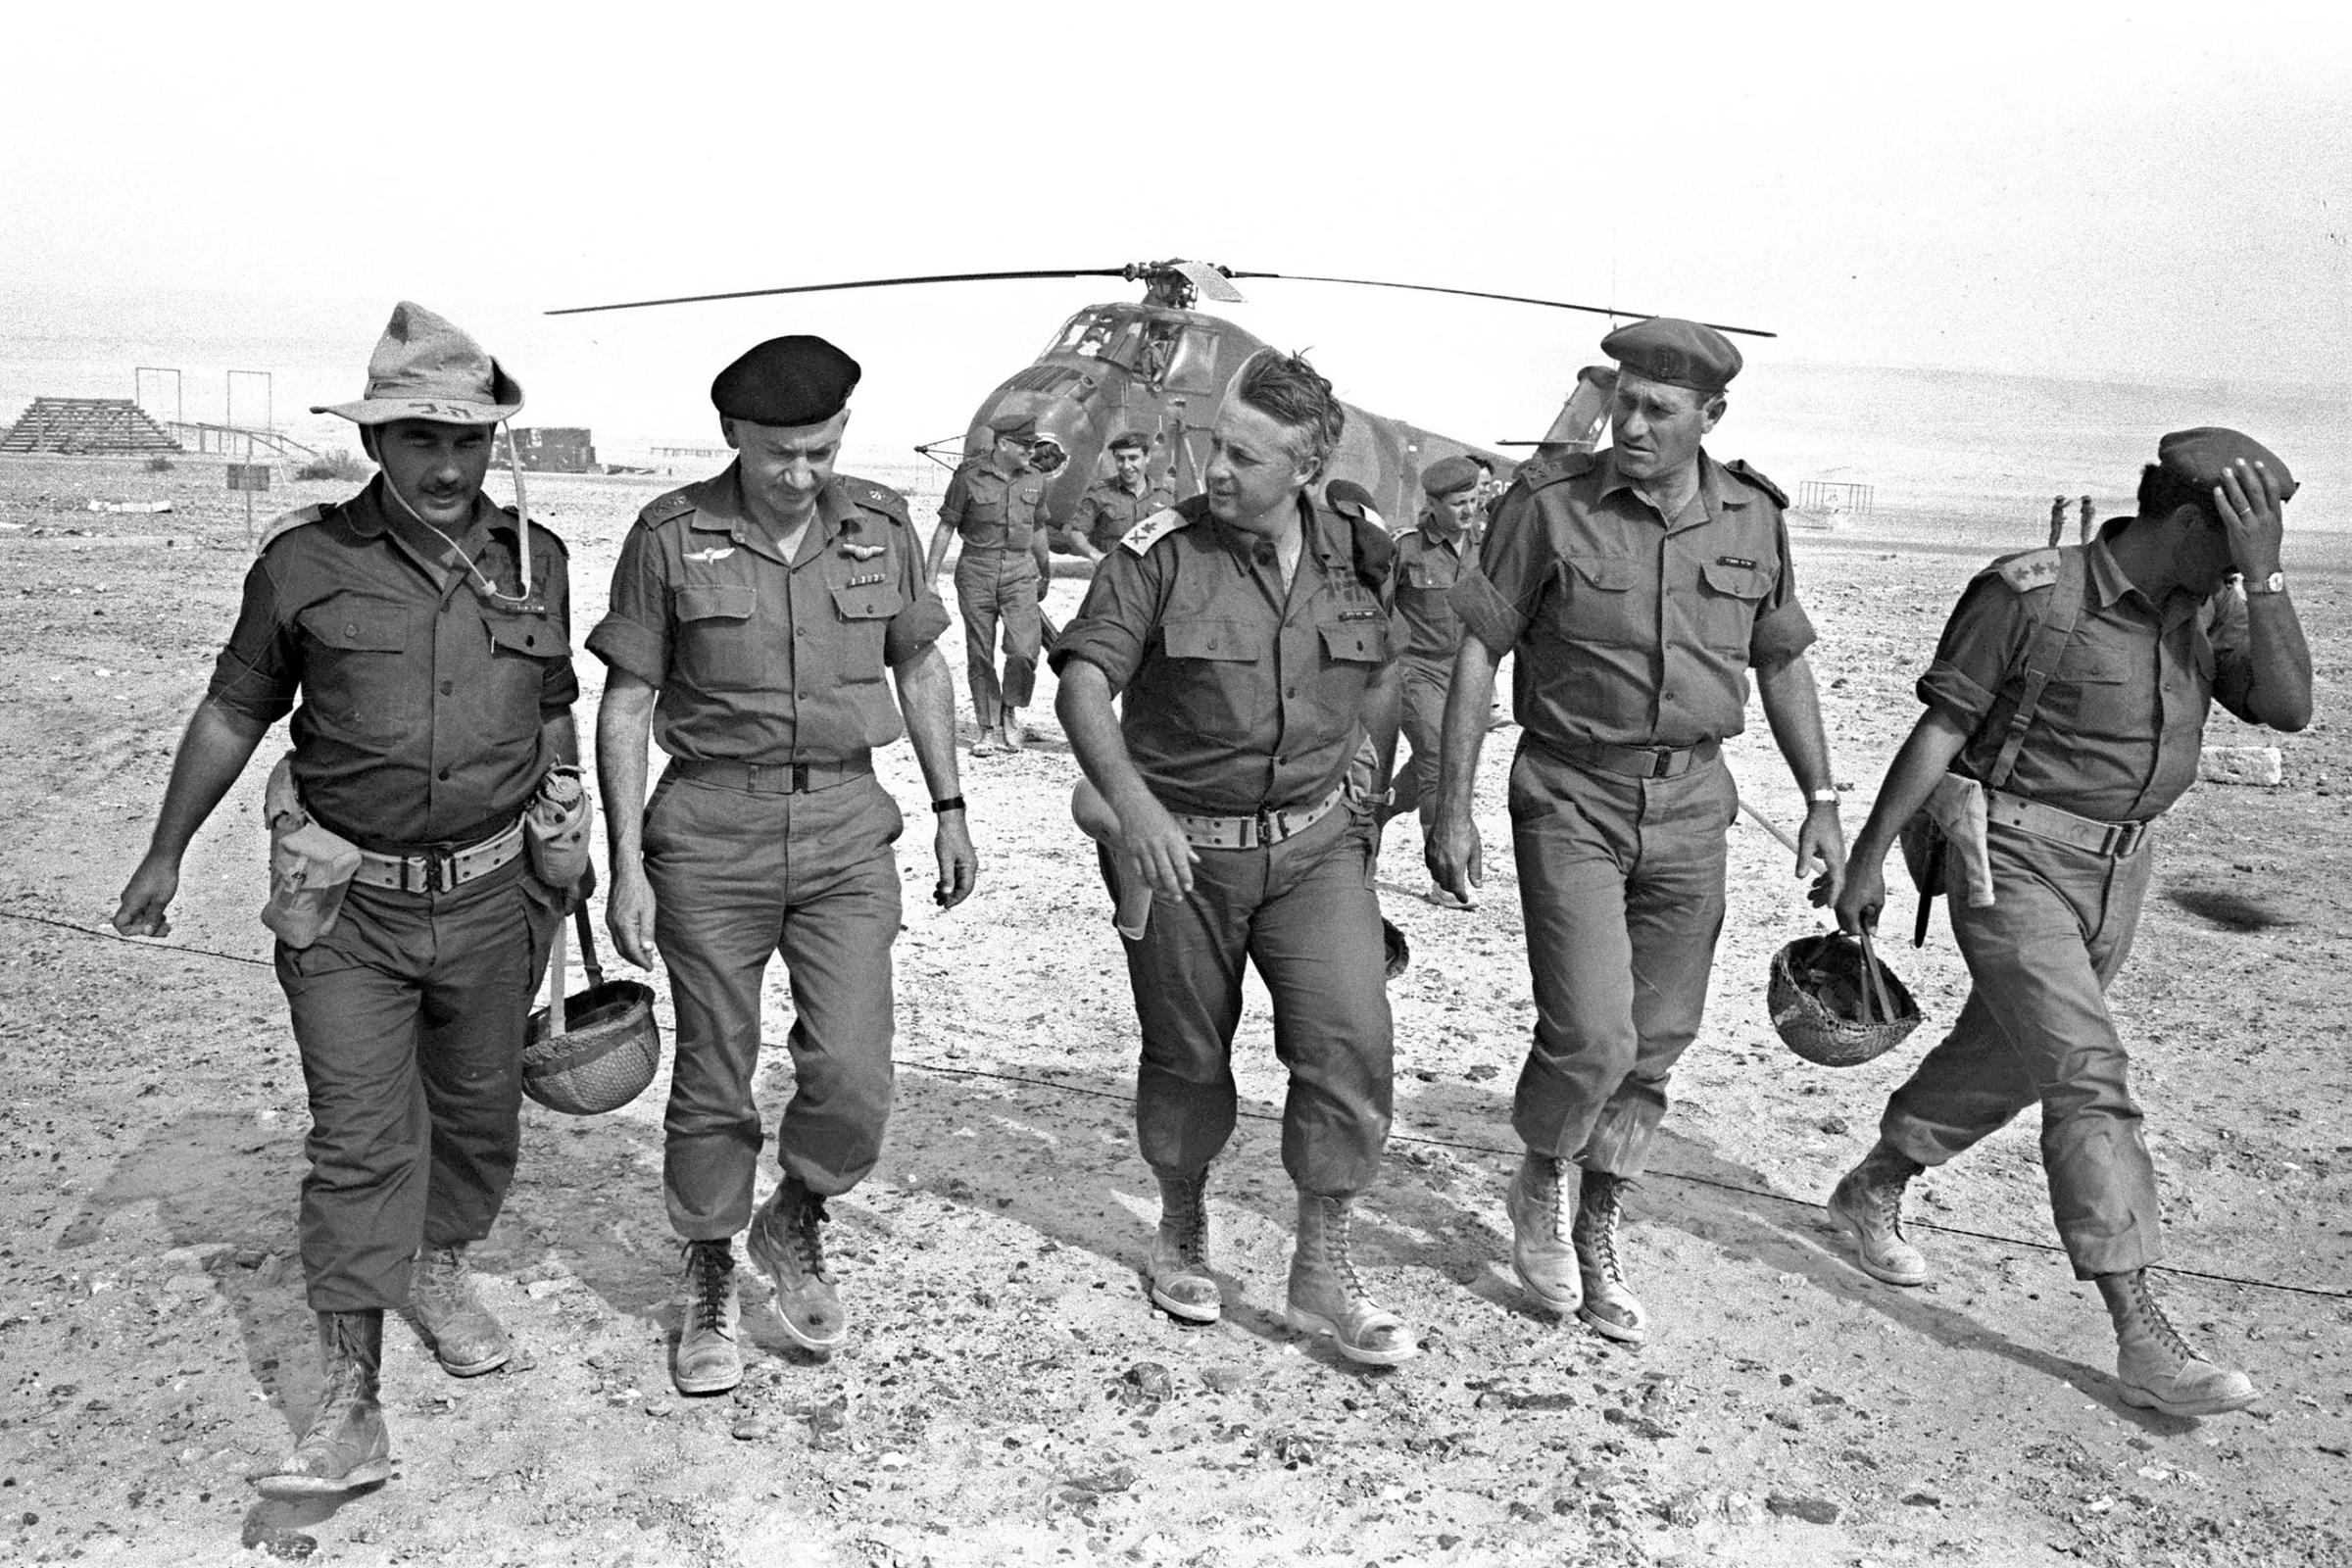 Israeli Army Gen. Ariel Sharon (C), flanked by Gens. Haim Bar-Lev (L) and Yishayahu Gavish (R) and unidentified aides, arrives by helicopter at an army base in Israel's Negev Desert, June 1, 1967.